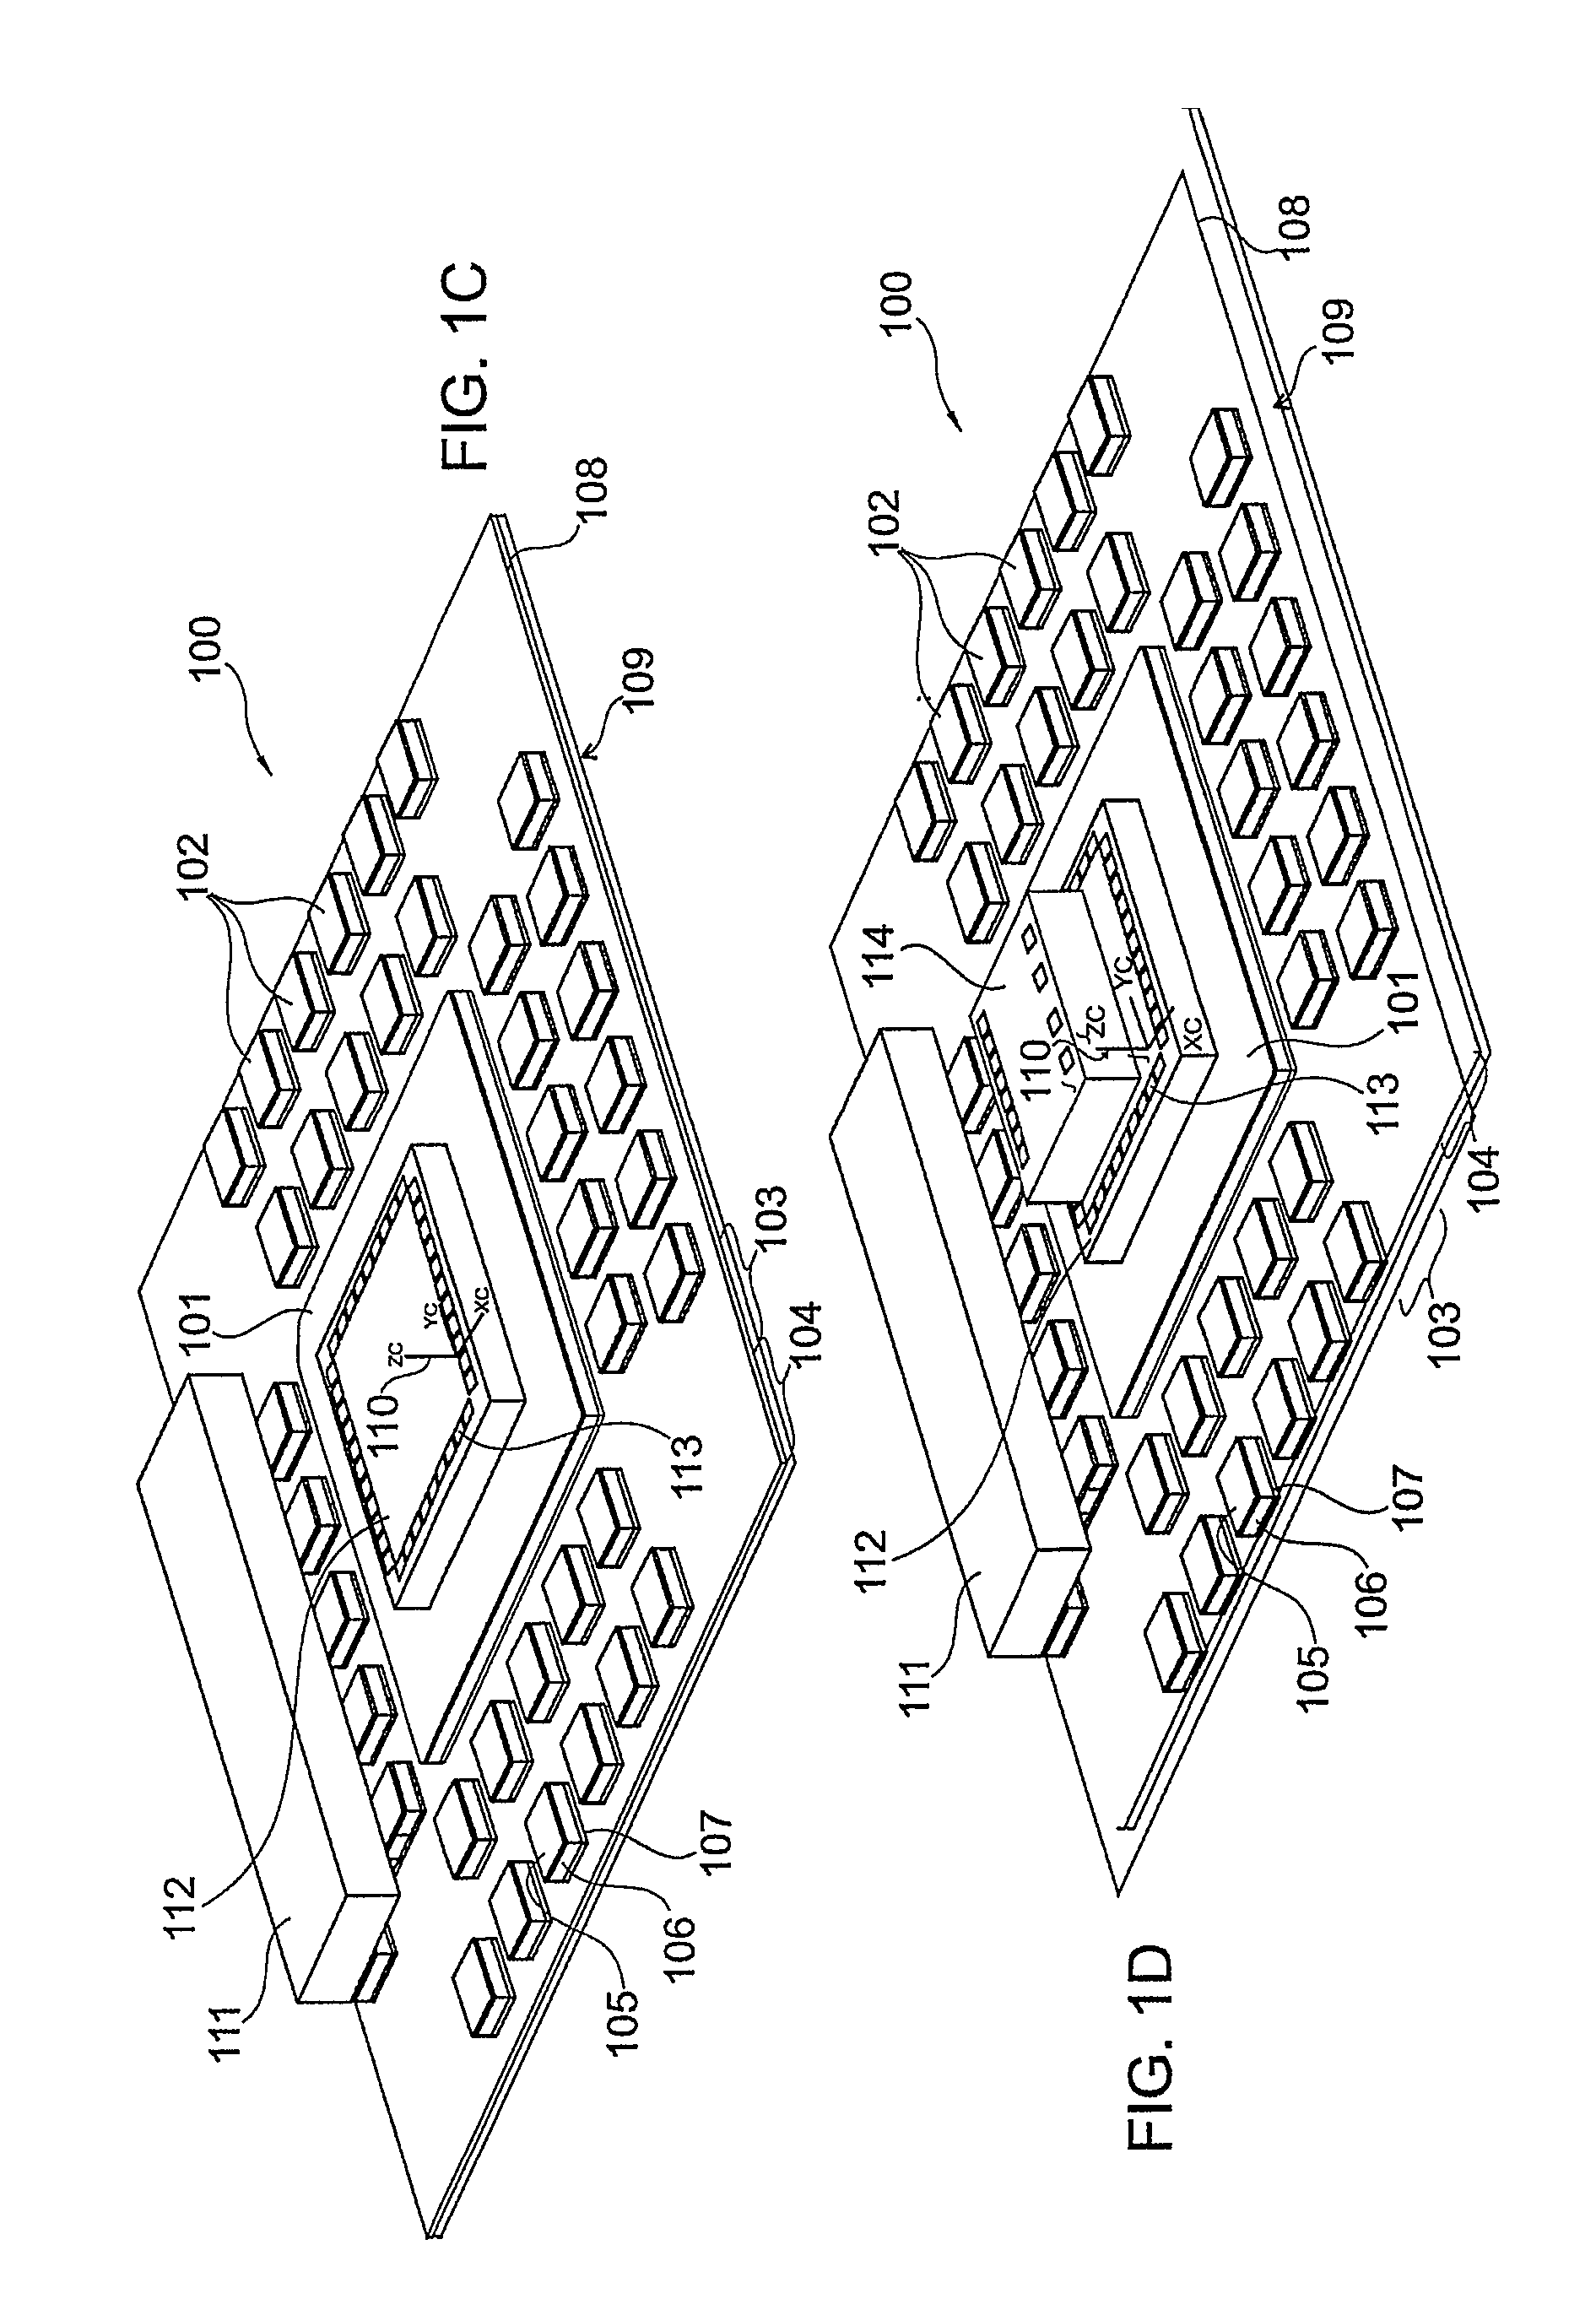 Package, method of manufacturing a package and frame